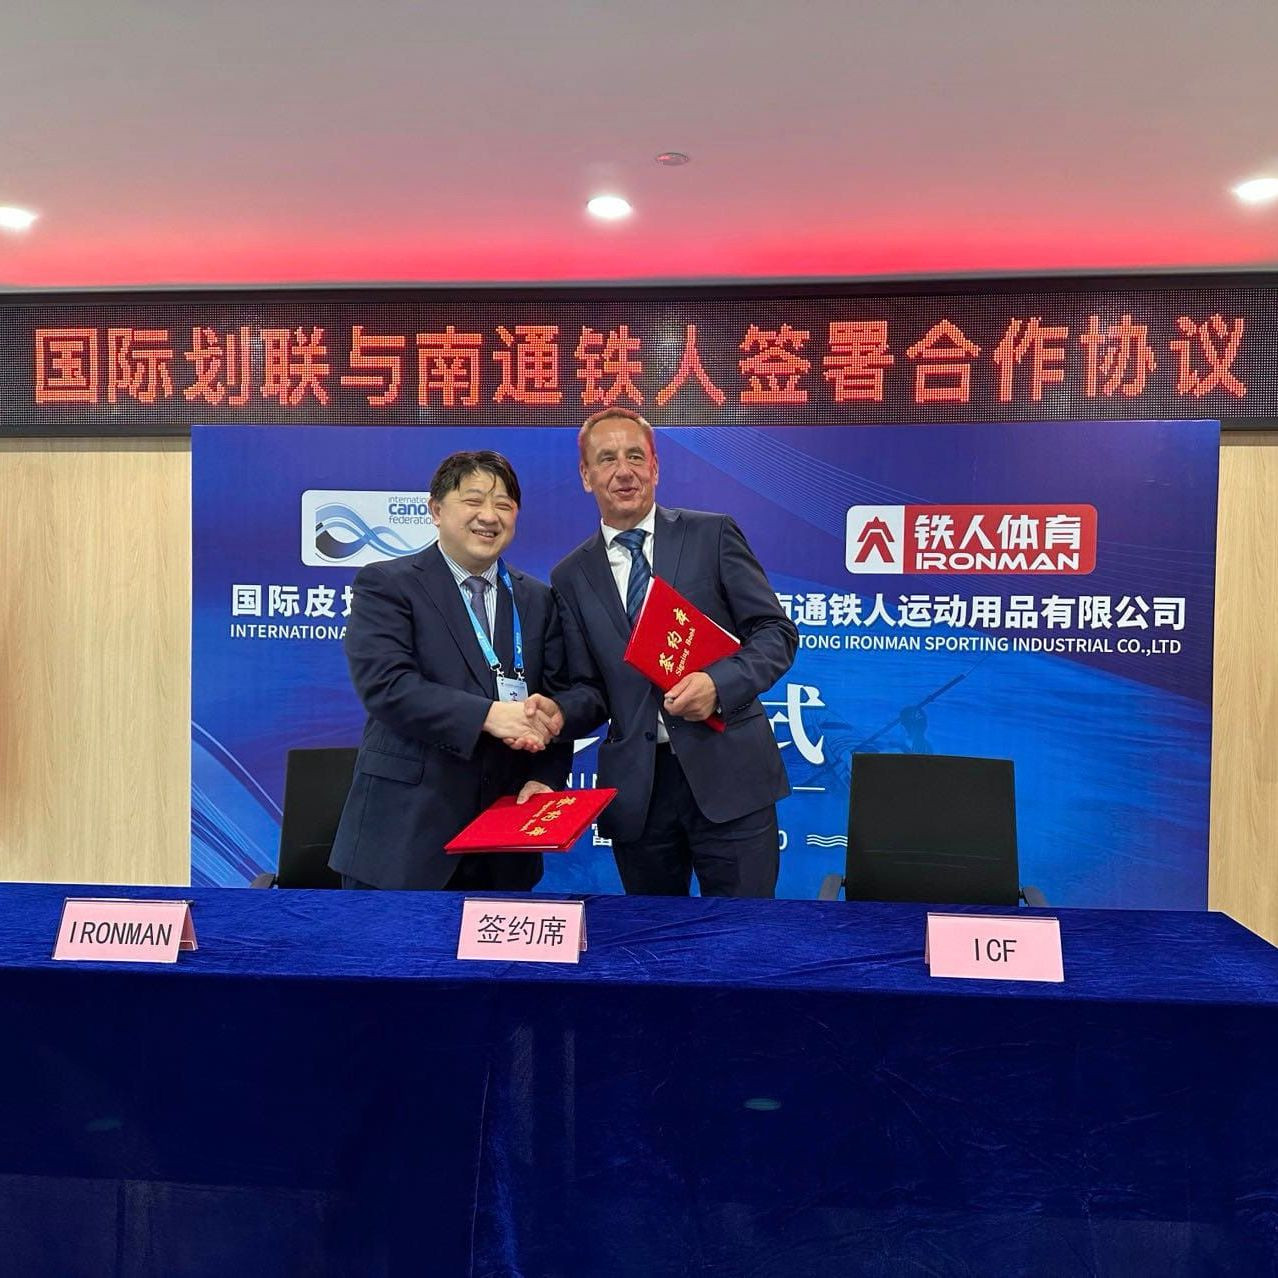 ICF signs three Chinese partnerships including broadcasting rights to China Media Group